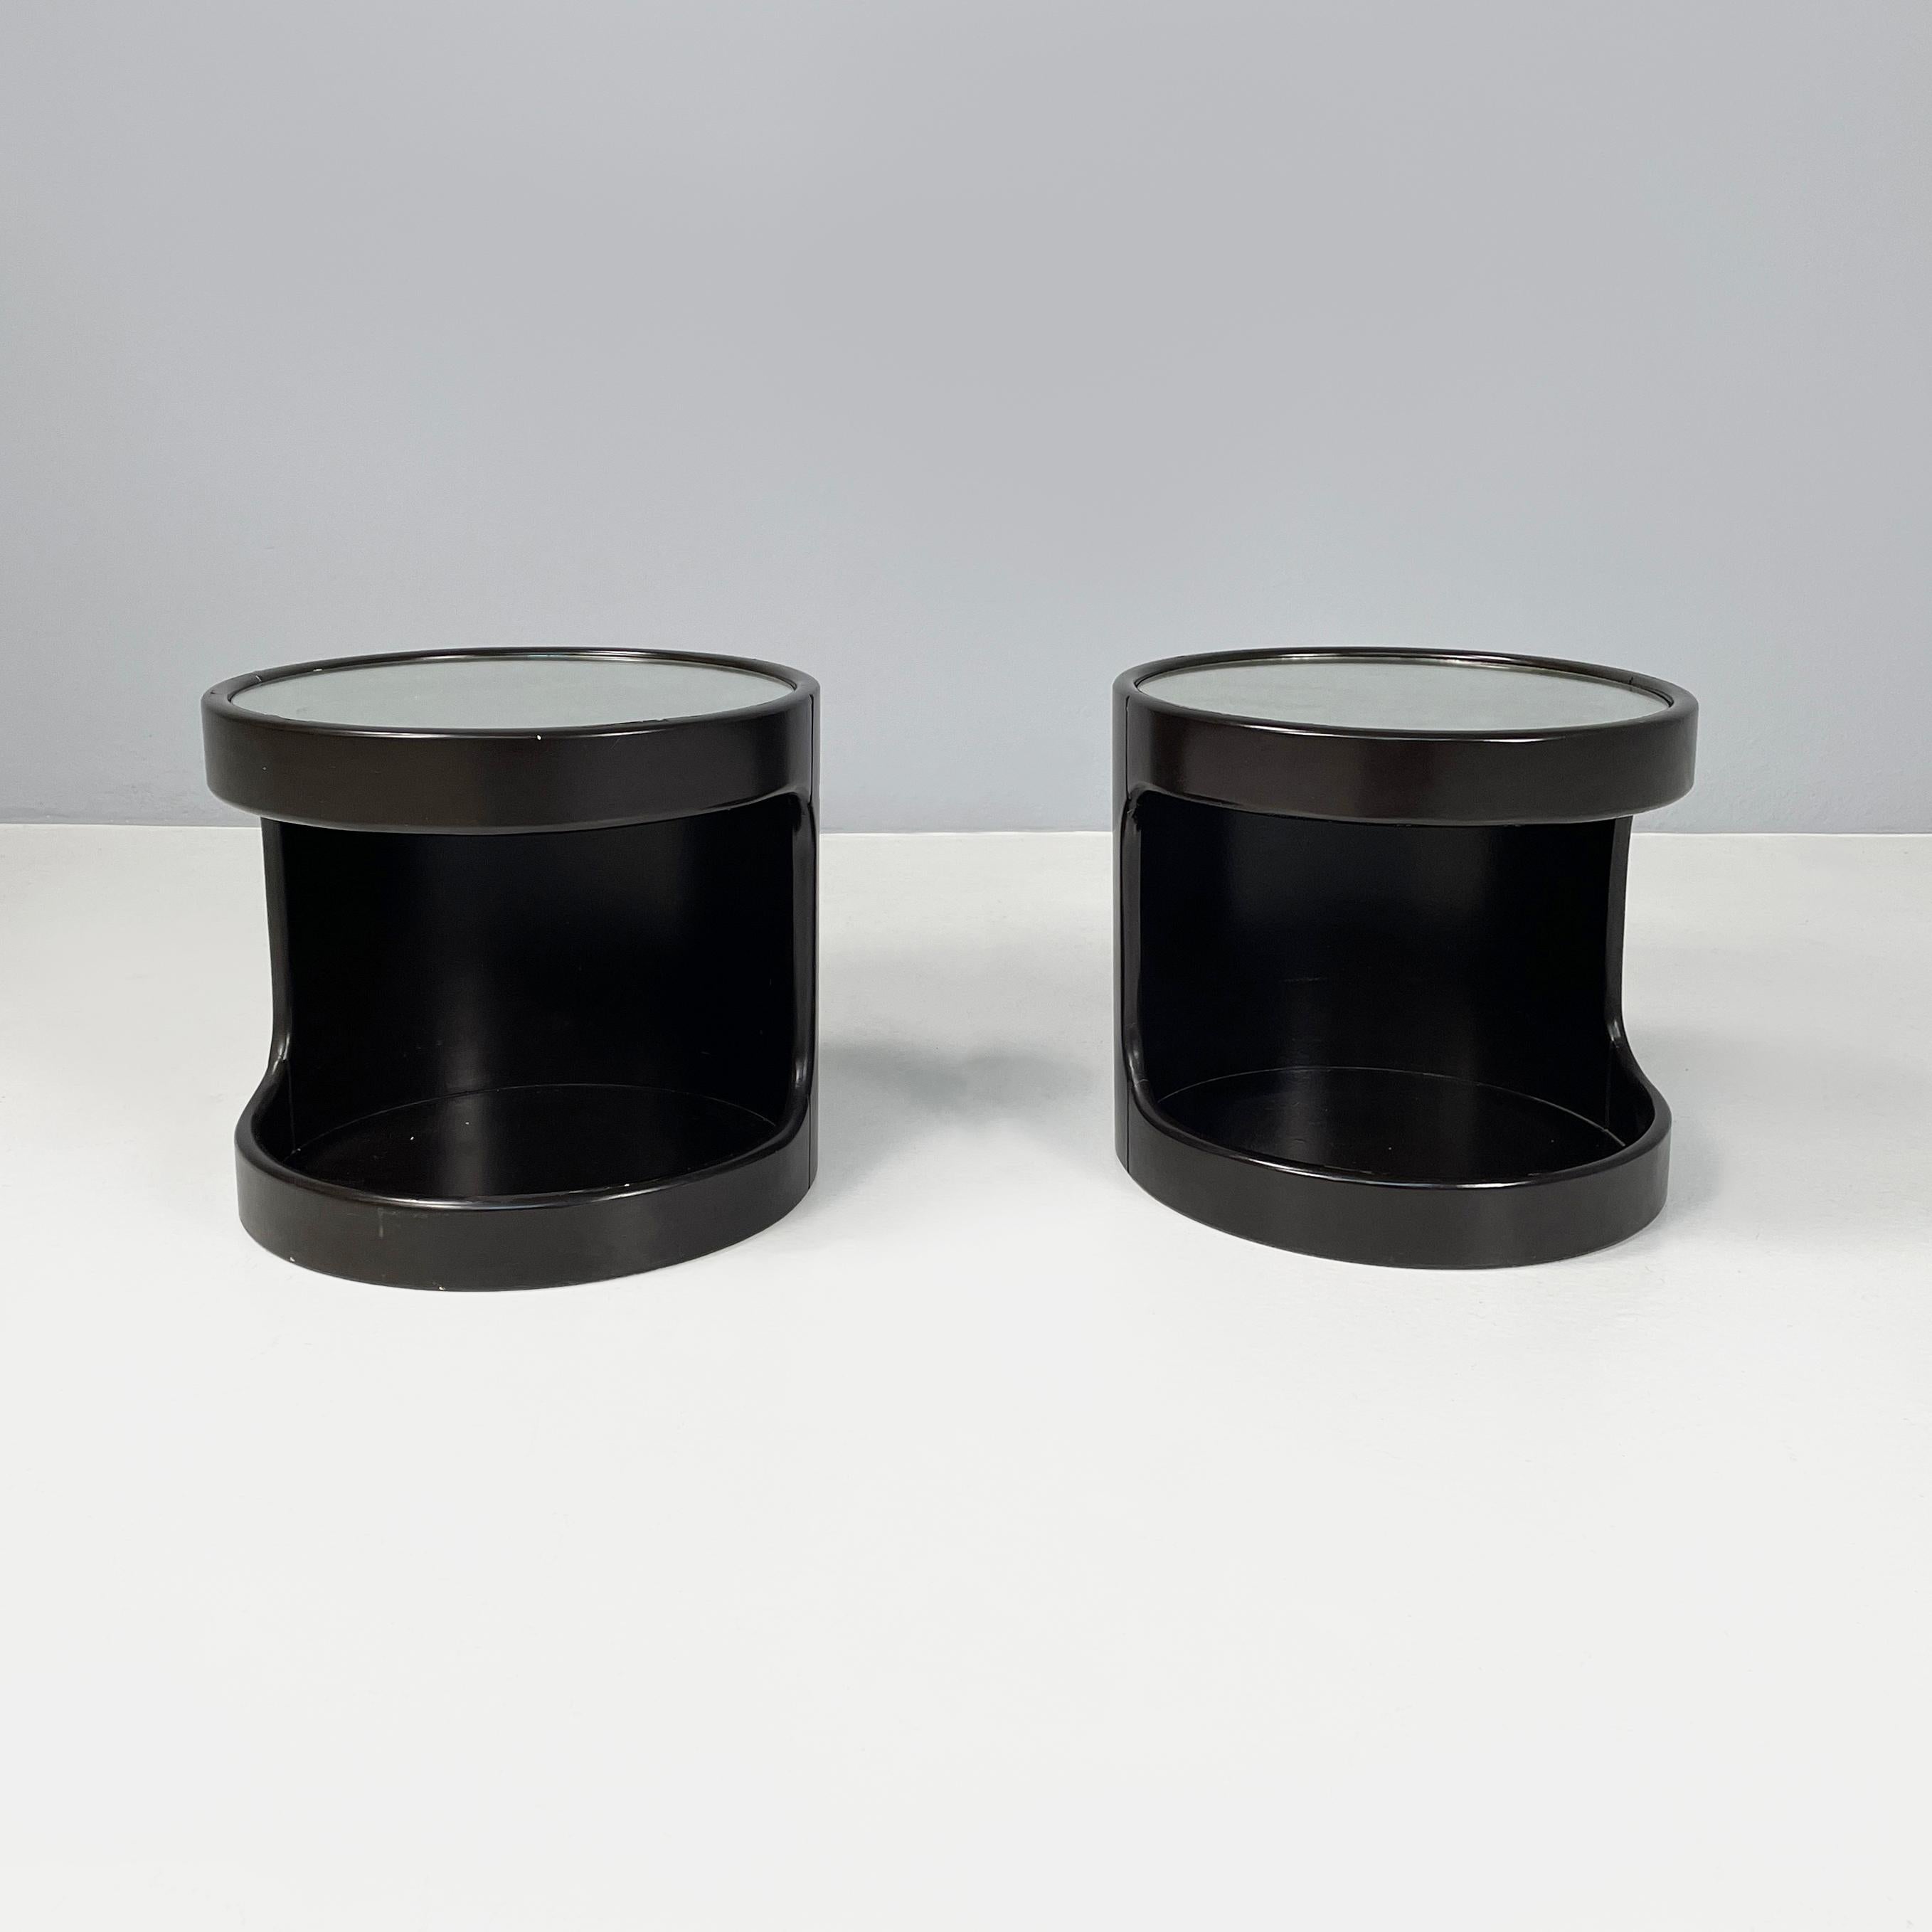 Italian modern Round coffee tables in dark brown wood and mirror, 1980s
Pair of coffee tables with round mirrored top. The cylindrical structure is in dark brown lacquered wood. On the front it has an open compartment. The coffee tables can be used